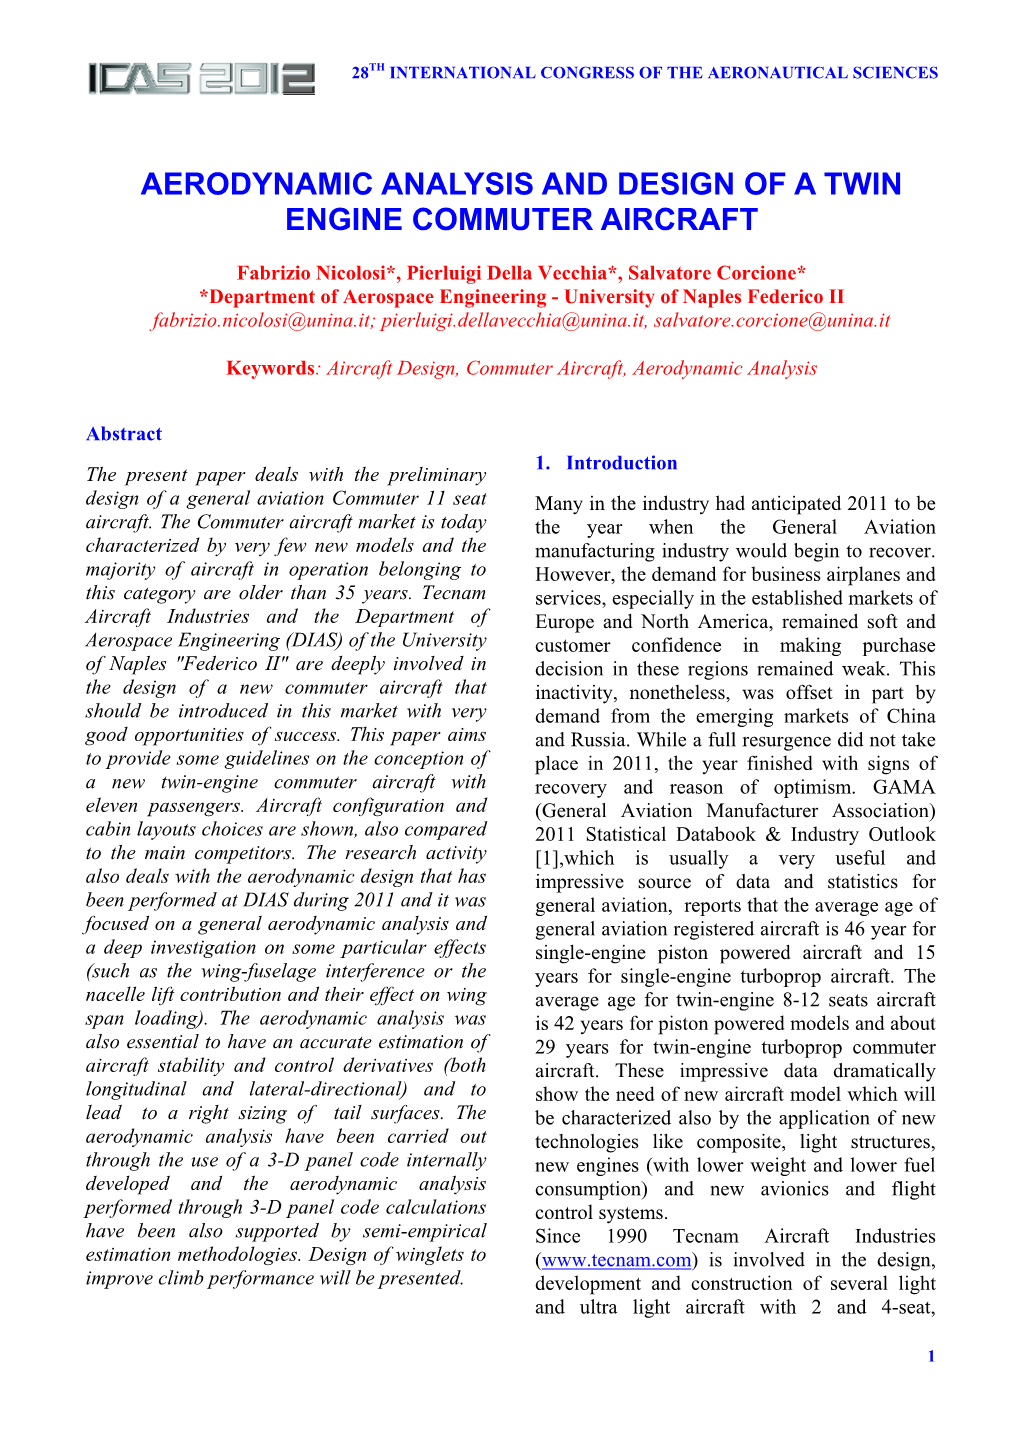 Aerodynamic Analysis and Design of a Twin Engine Commuter Aircraft